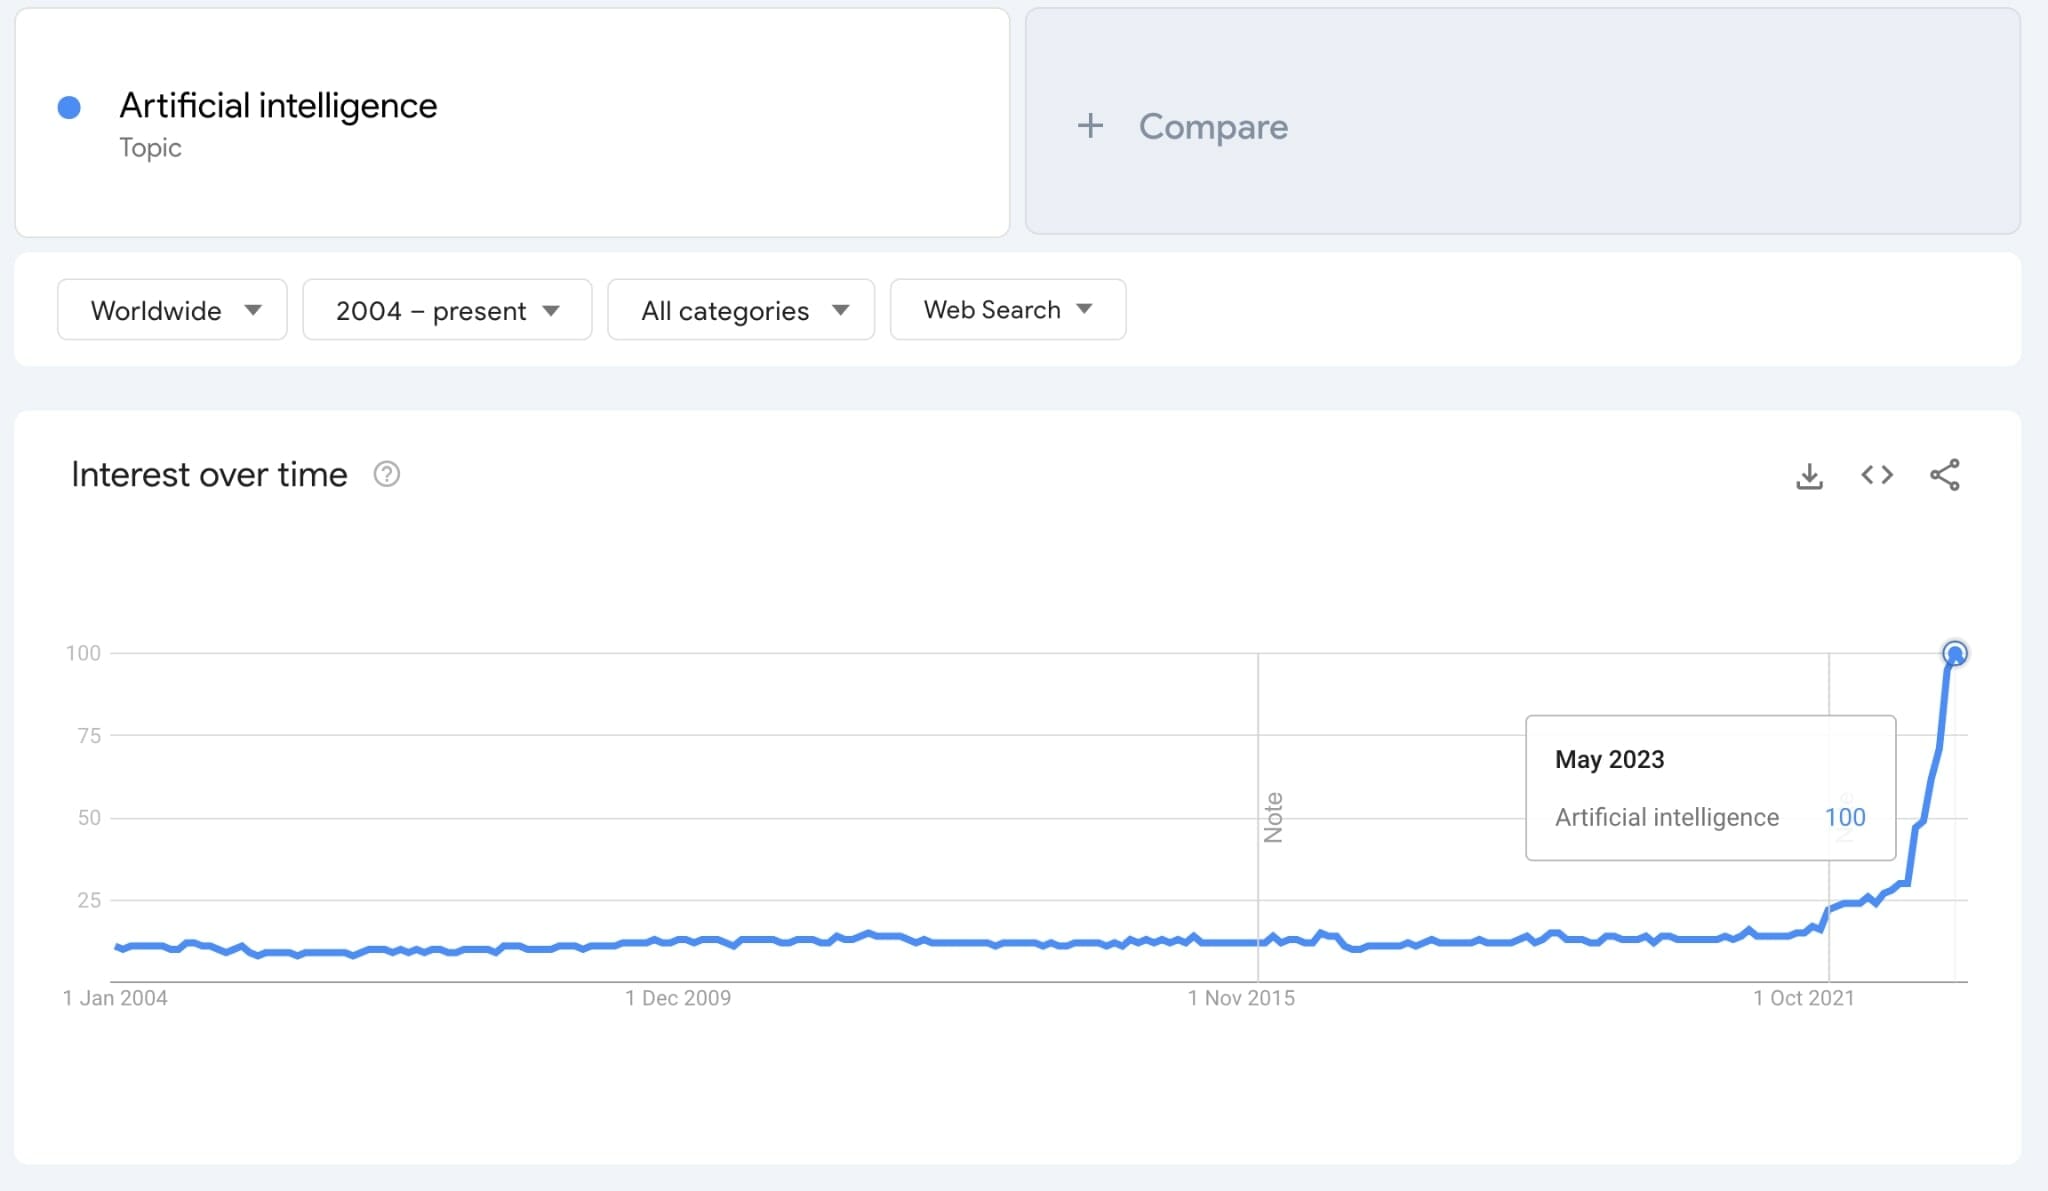 Searches For VR 